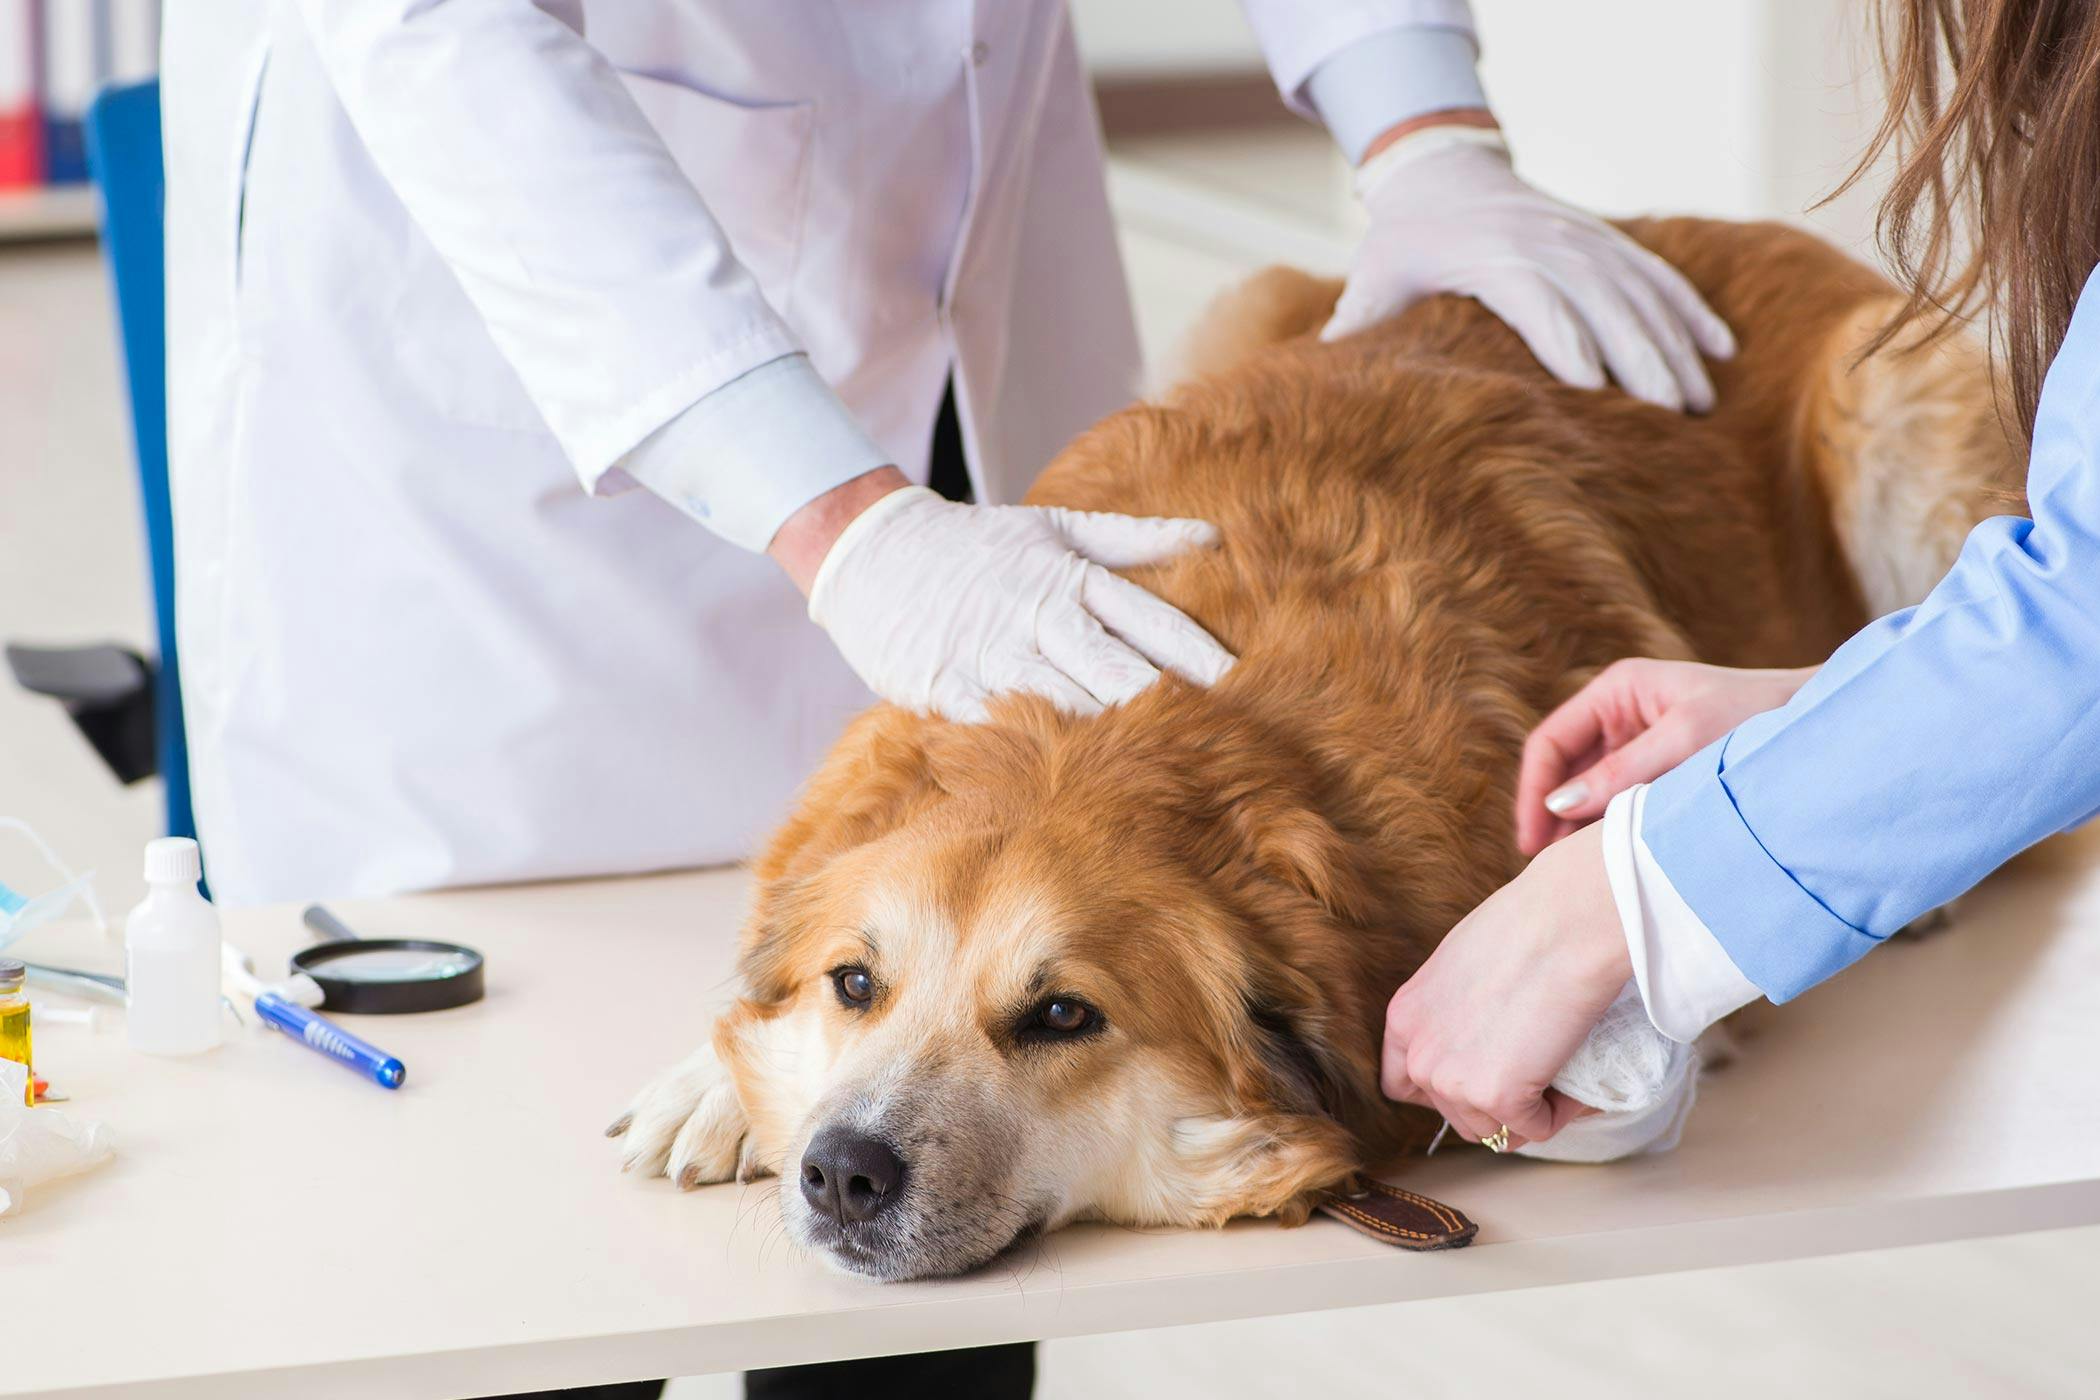 Tramadol for dogs cost of